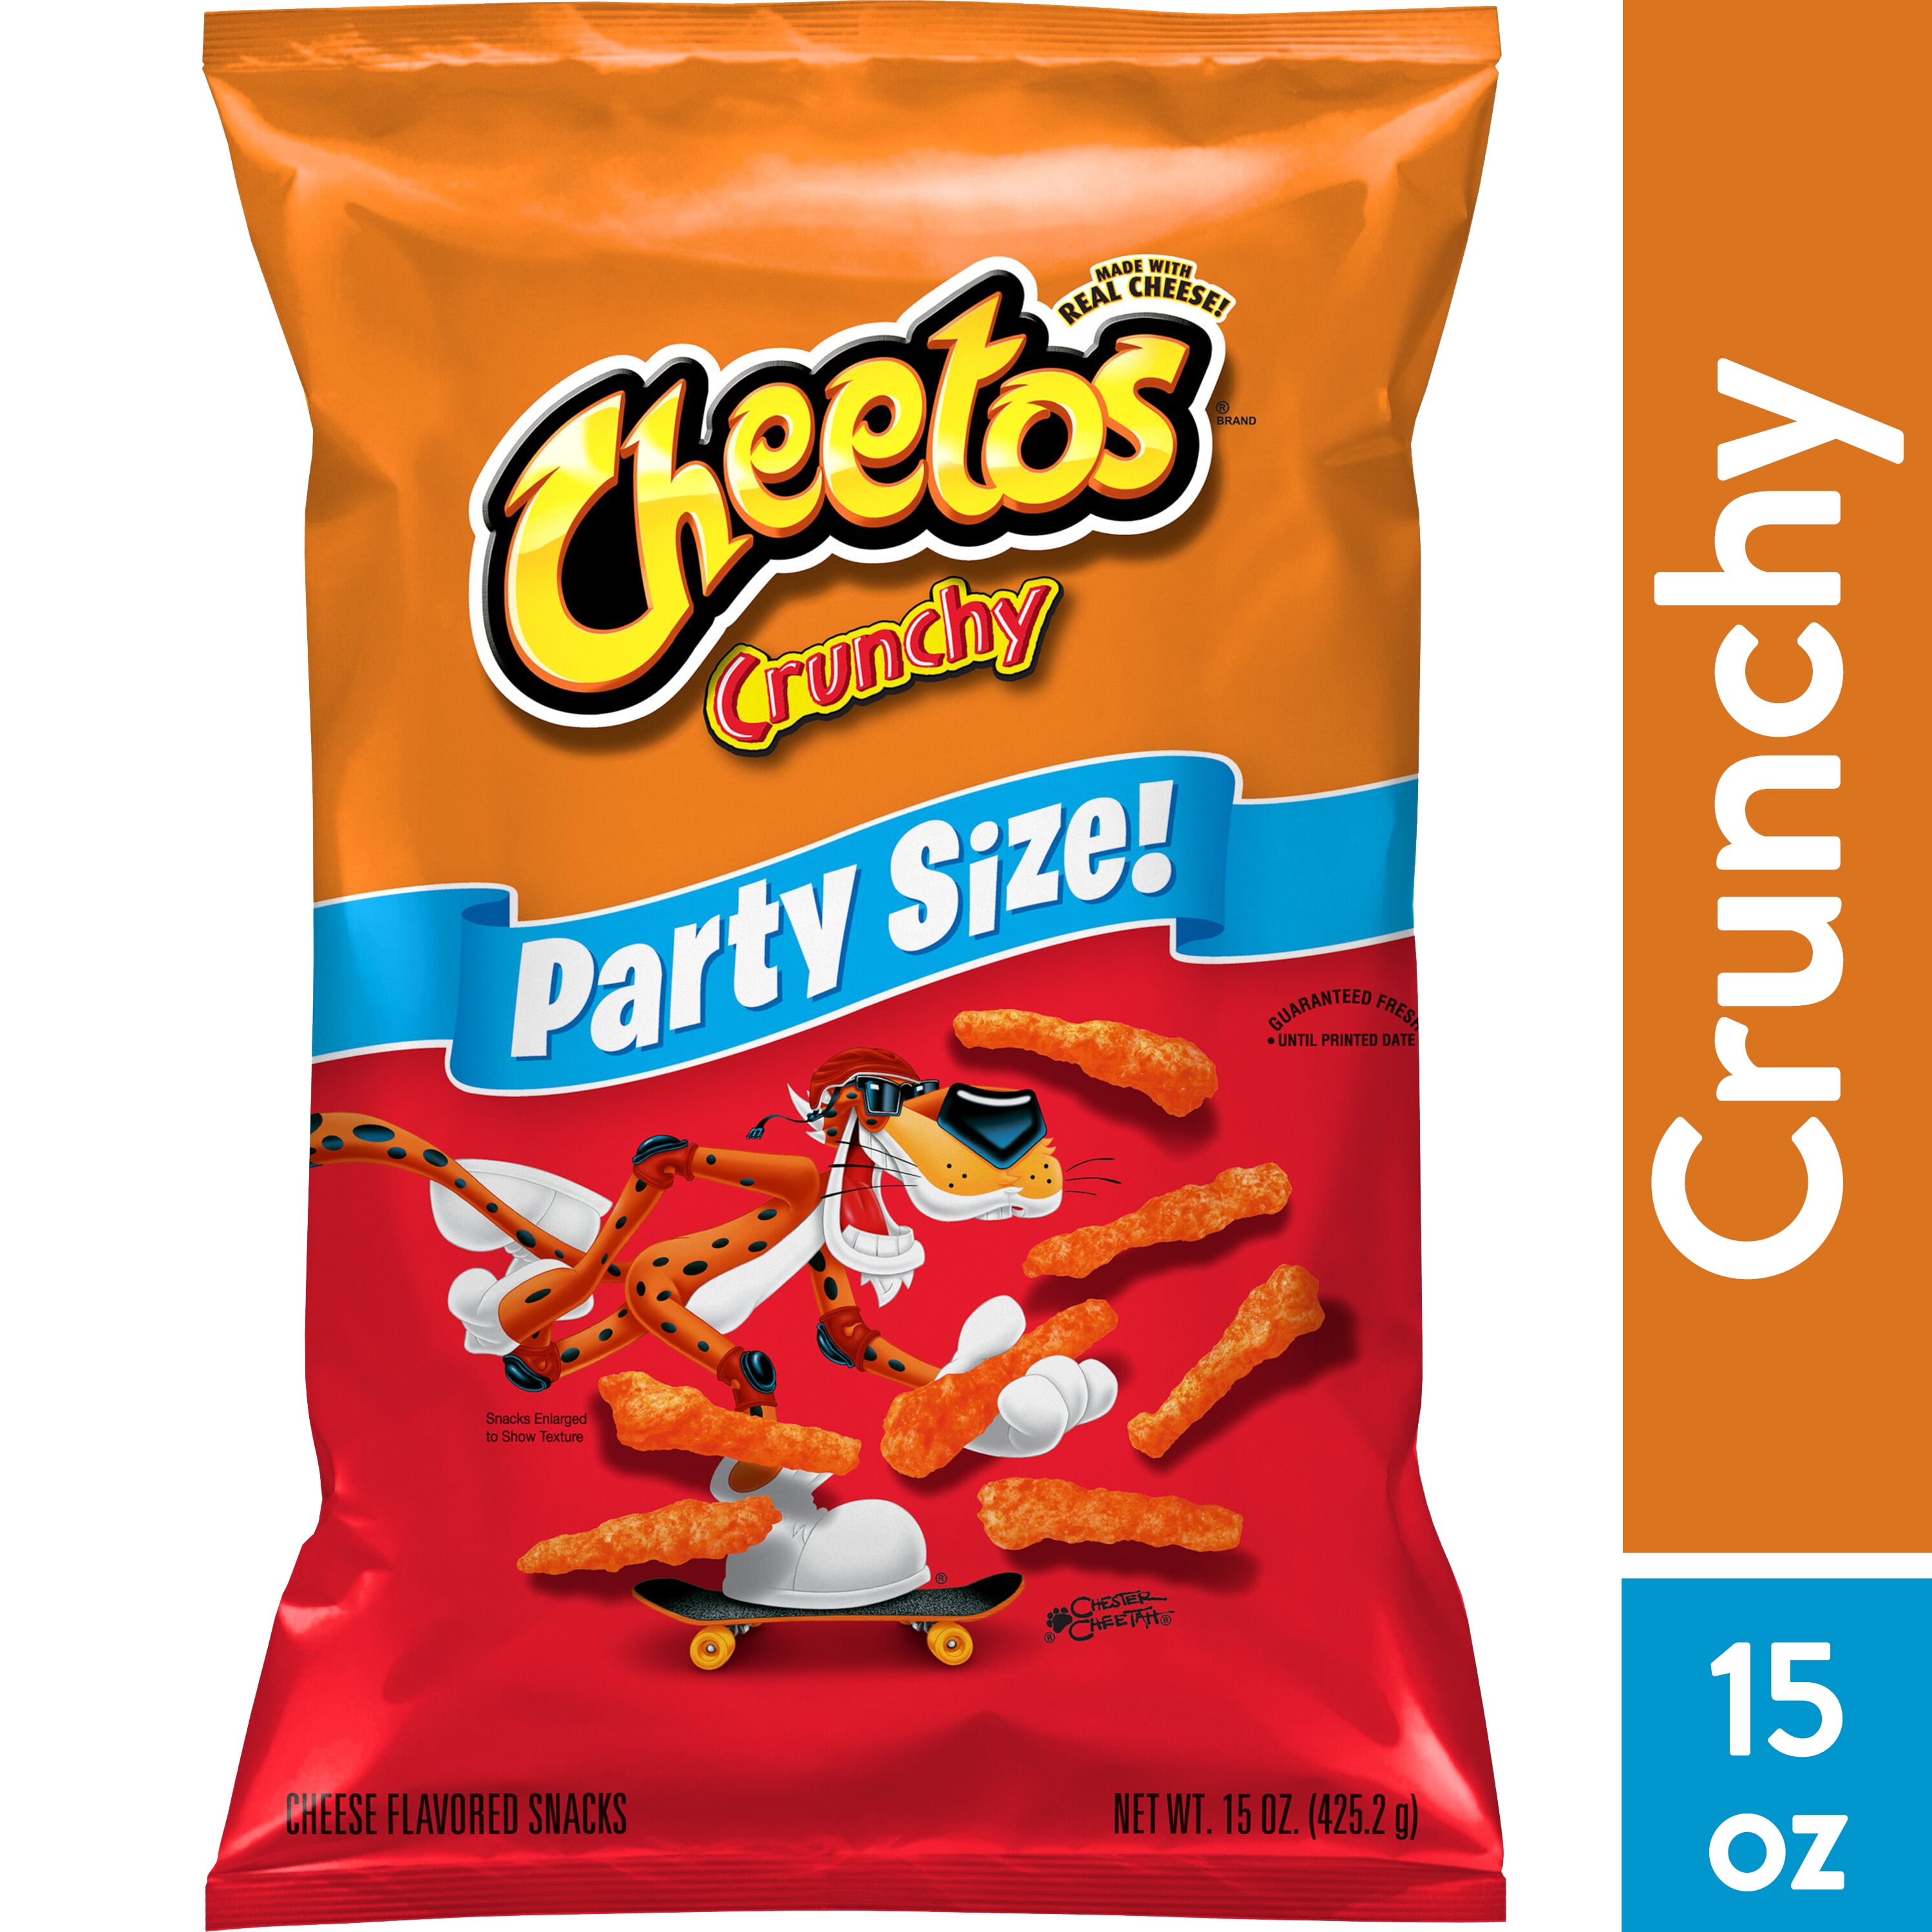 Cheetos Crunchy Cheese Flavored Snack Chips, 15 oz